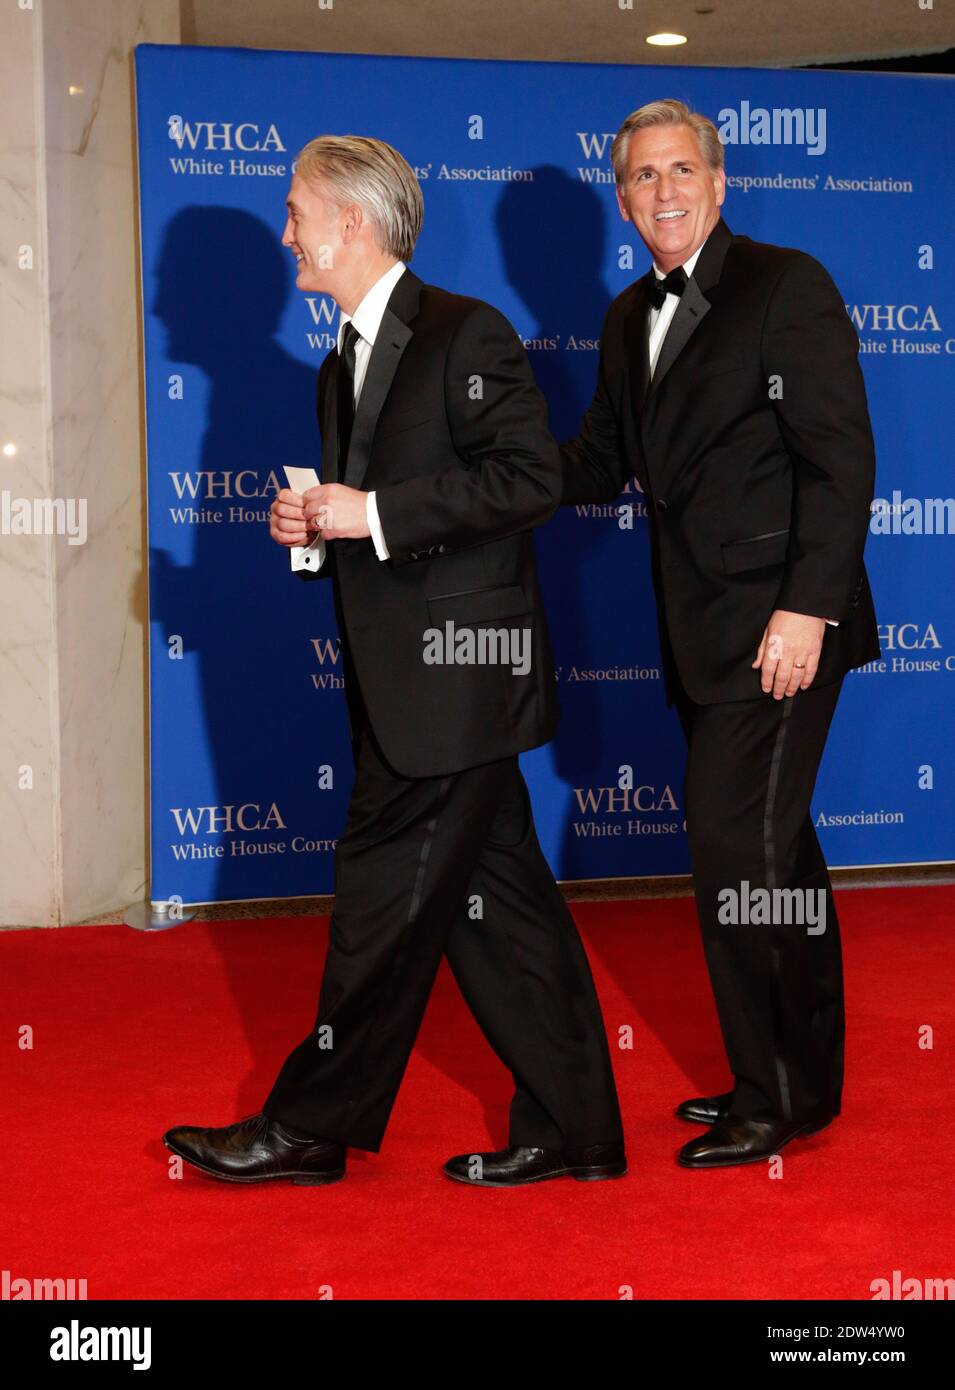 U.S. Representative Trey Gowdy (R-SC) House Republican Whip Kevin McCarthy (R-CA) attend the 2014 White House Correspondents' Association Dinner at the Washington Hilton in Washington, DC, USA on May 3, 2014. Photo by Chris Kleponis/ABACAPRESS.COM Stock Photo